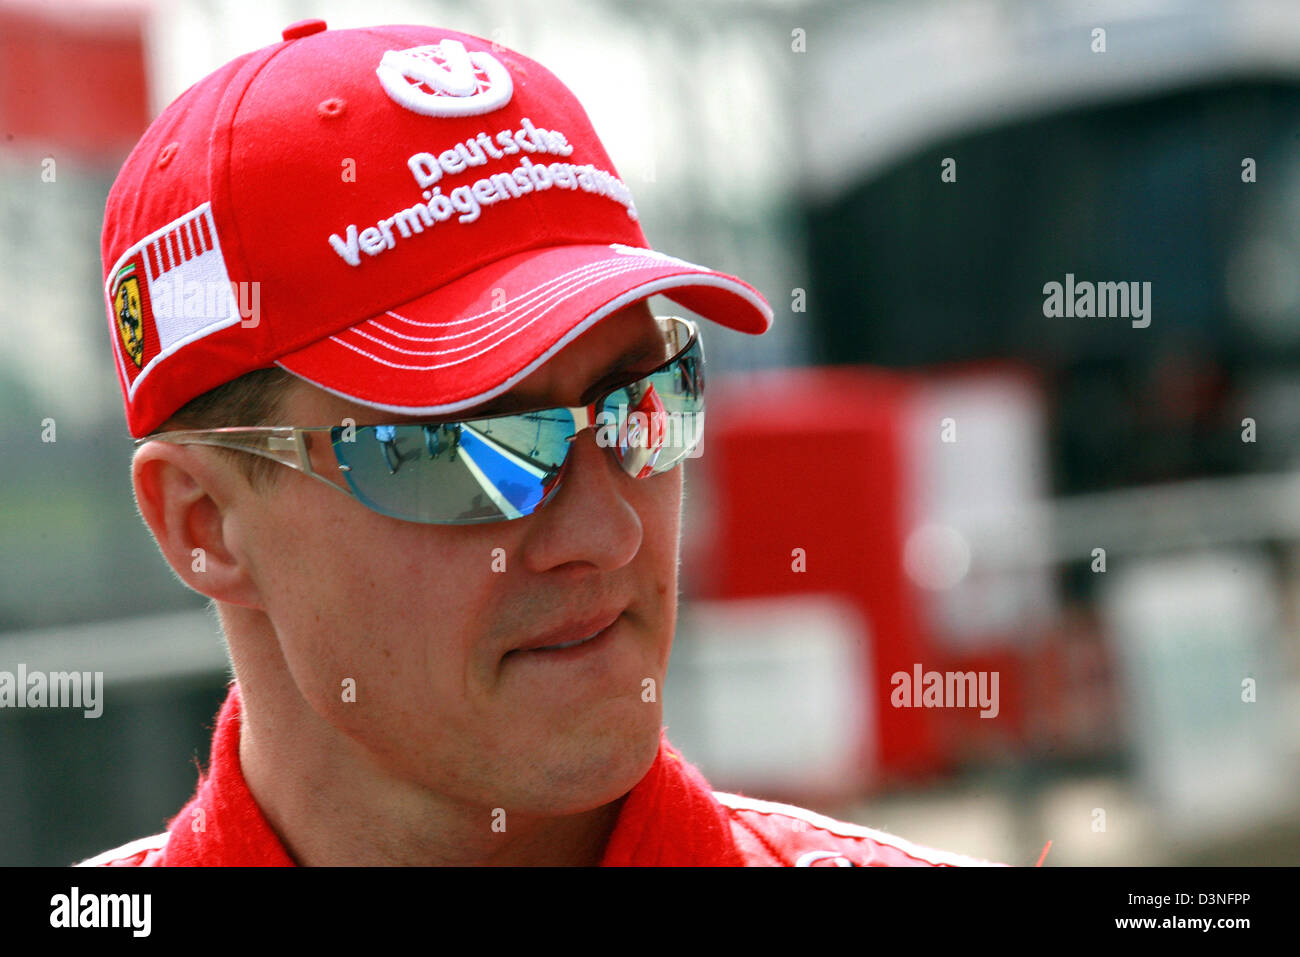 German Formula One pilot Michael Schumacher of Scuderia Ferrari seen with  reflections on his sunglasses at the Nuerburgring race track in Nuerburg,  Germany, Thursday, 4 May 2006. The Grand Prix of Europe